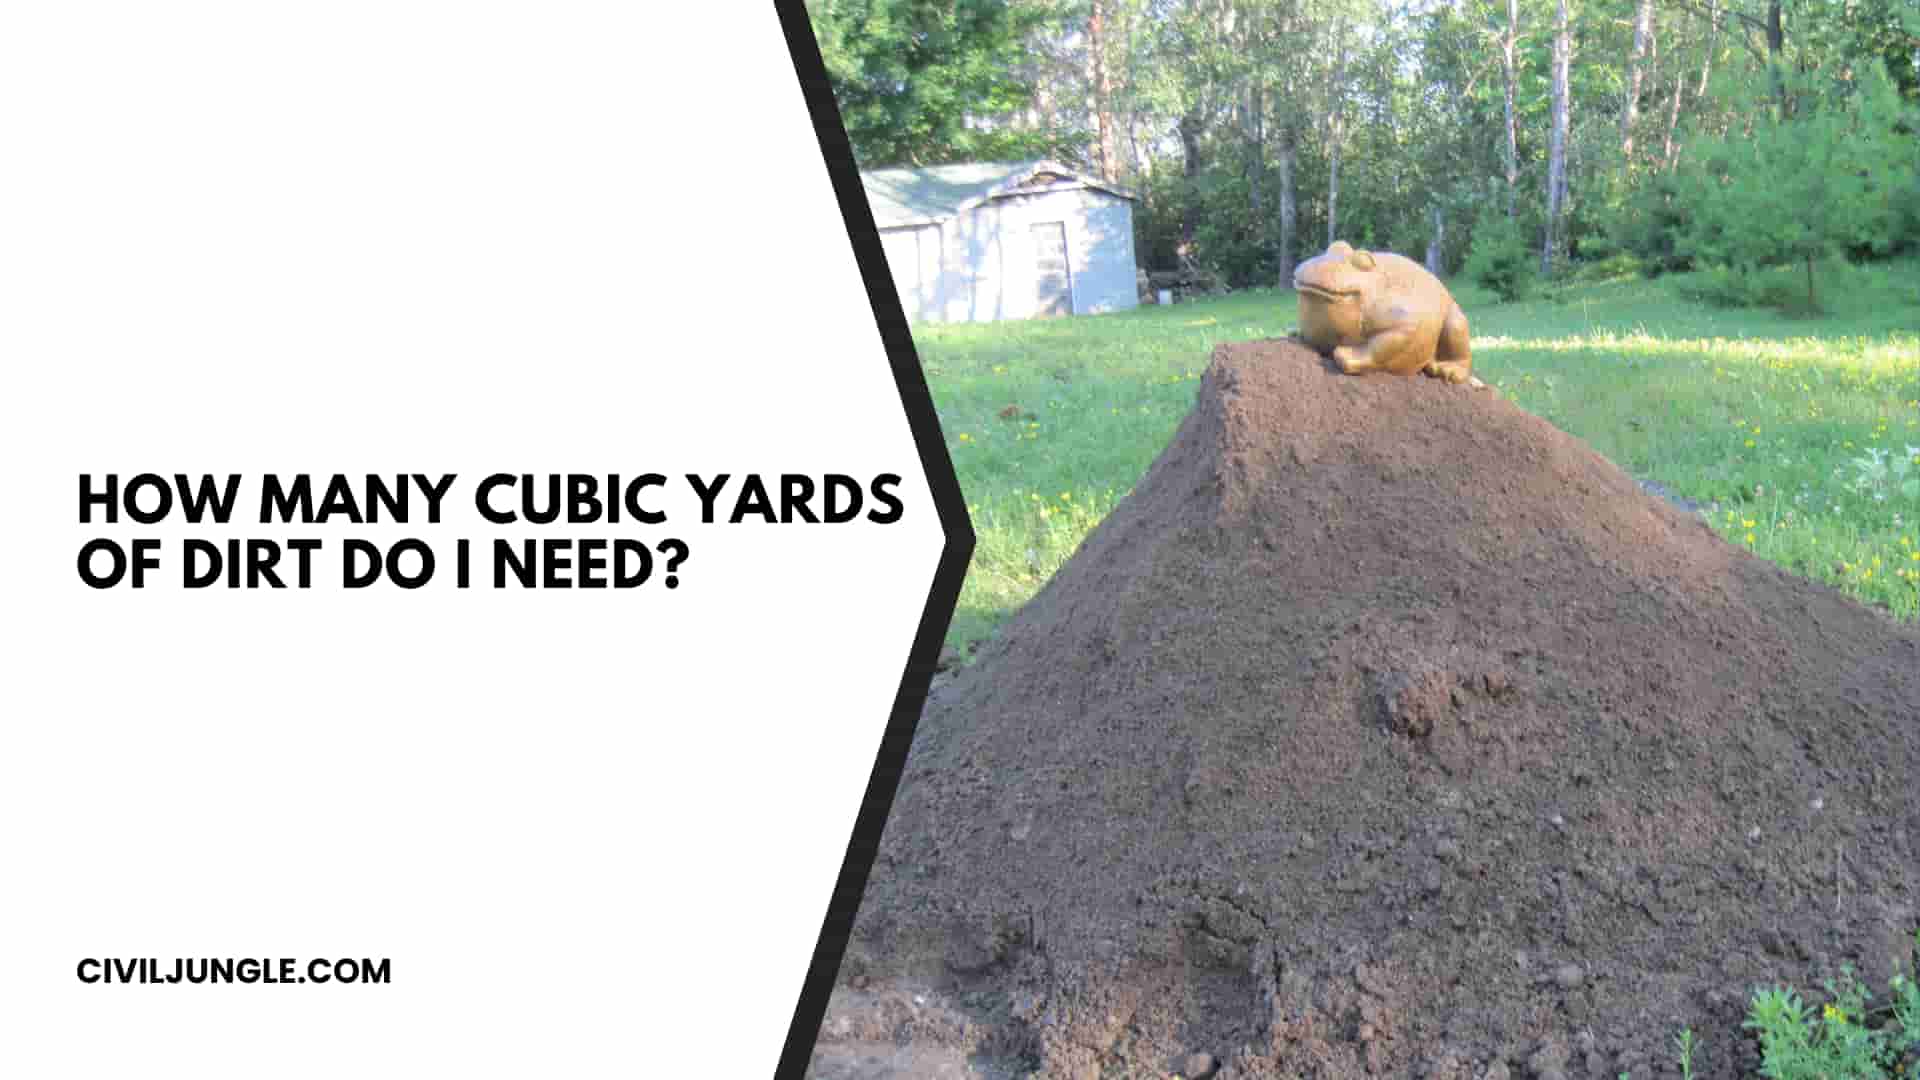 How Many Cubic Yards of Dirt Do I Need?